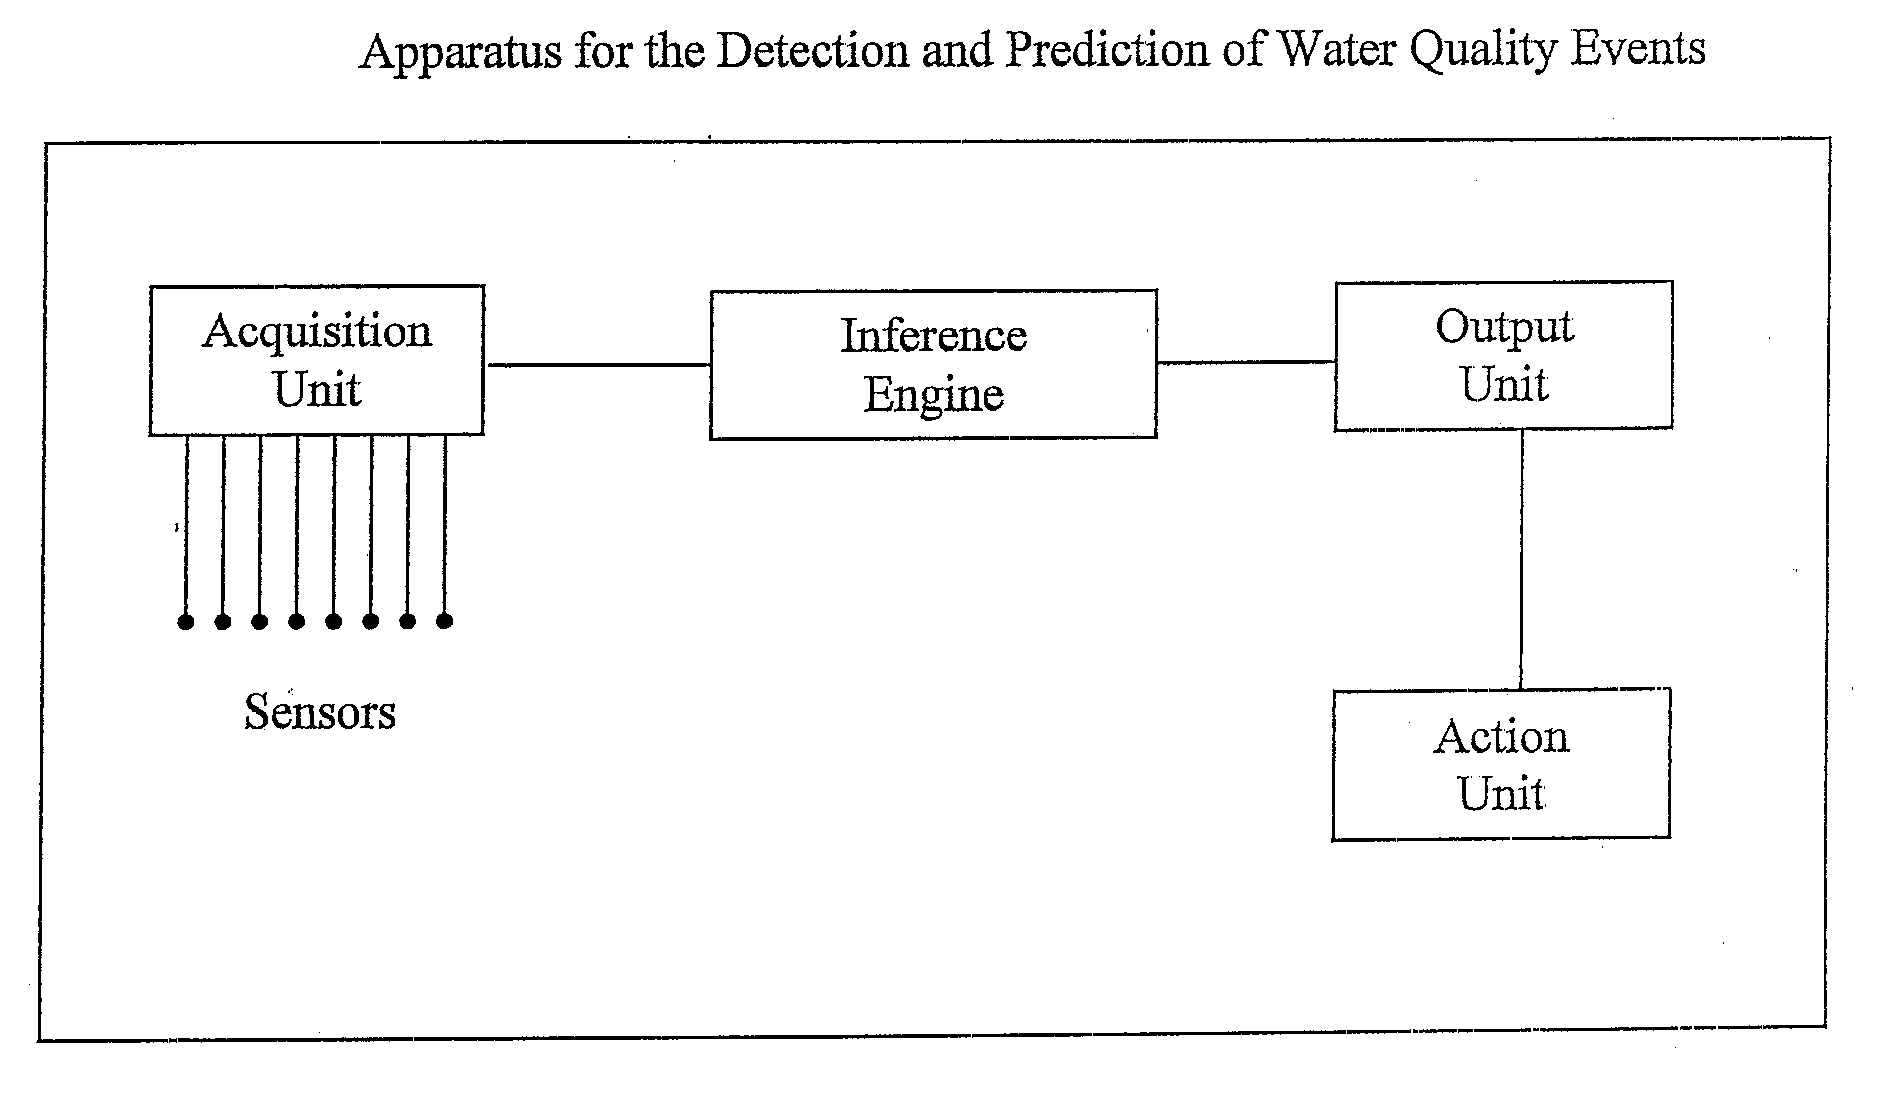 System for detection and prediction of water quality events